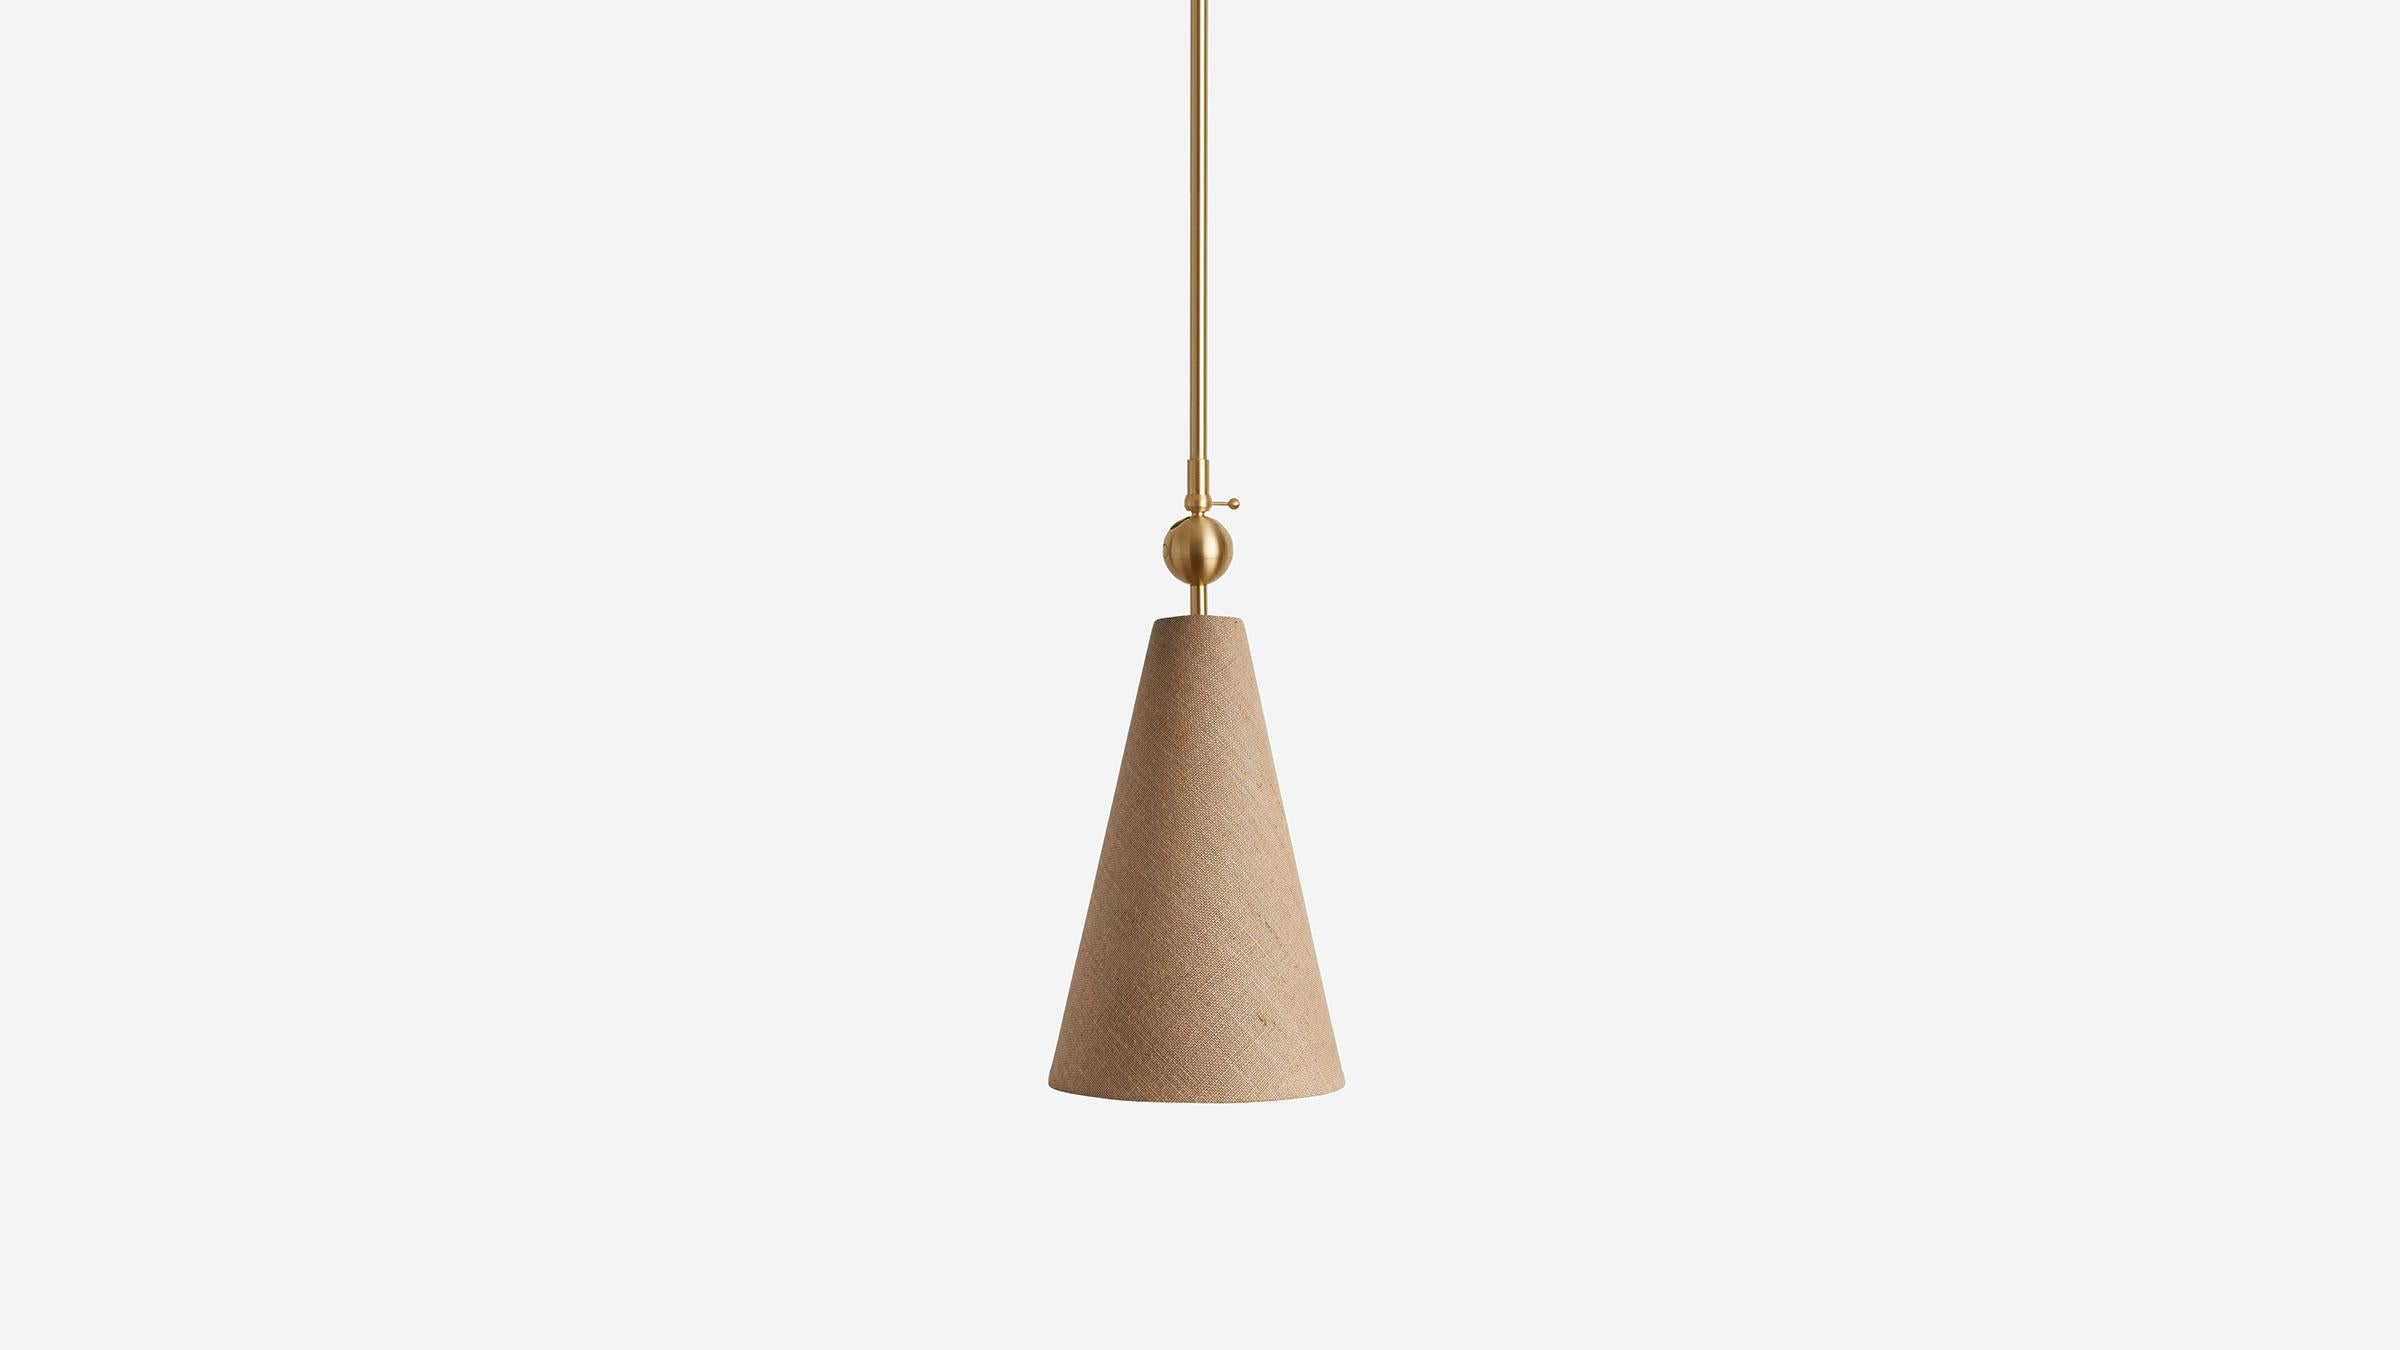 Pendolo Pendant I is composed of a directional fabric cone, radiating a subtle cast of light into a space - and a focused beam of light - in a myriad of configurations. Available in either Natural Burlap or Linen, the cone form is expressed as a